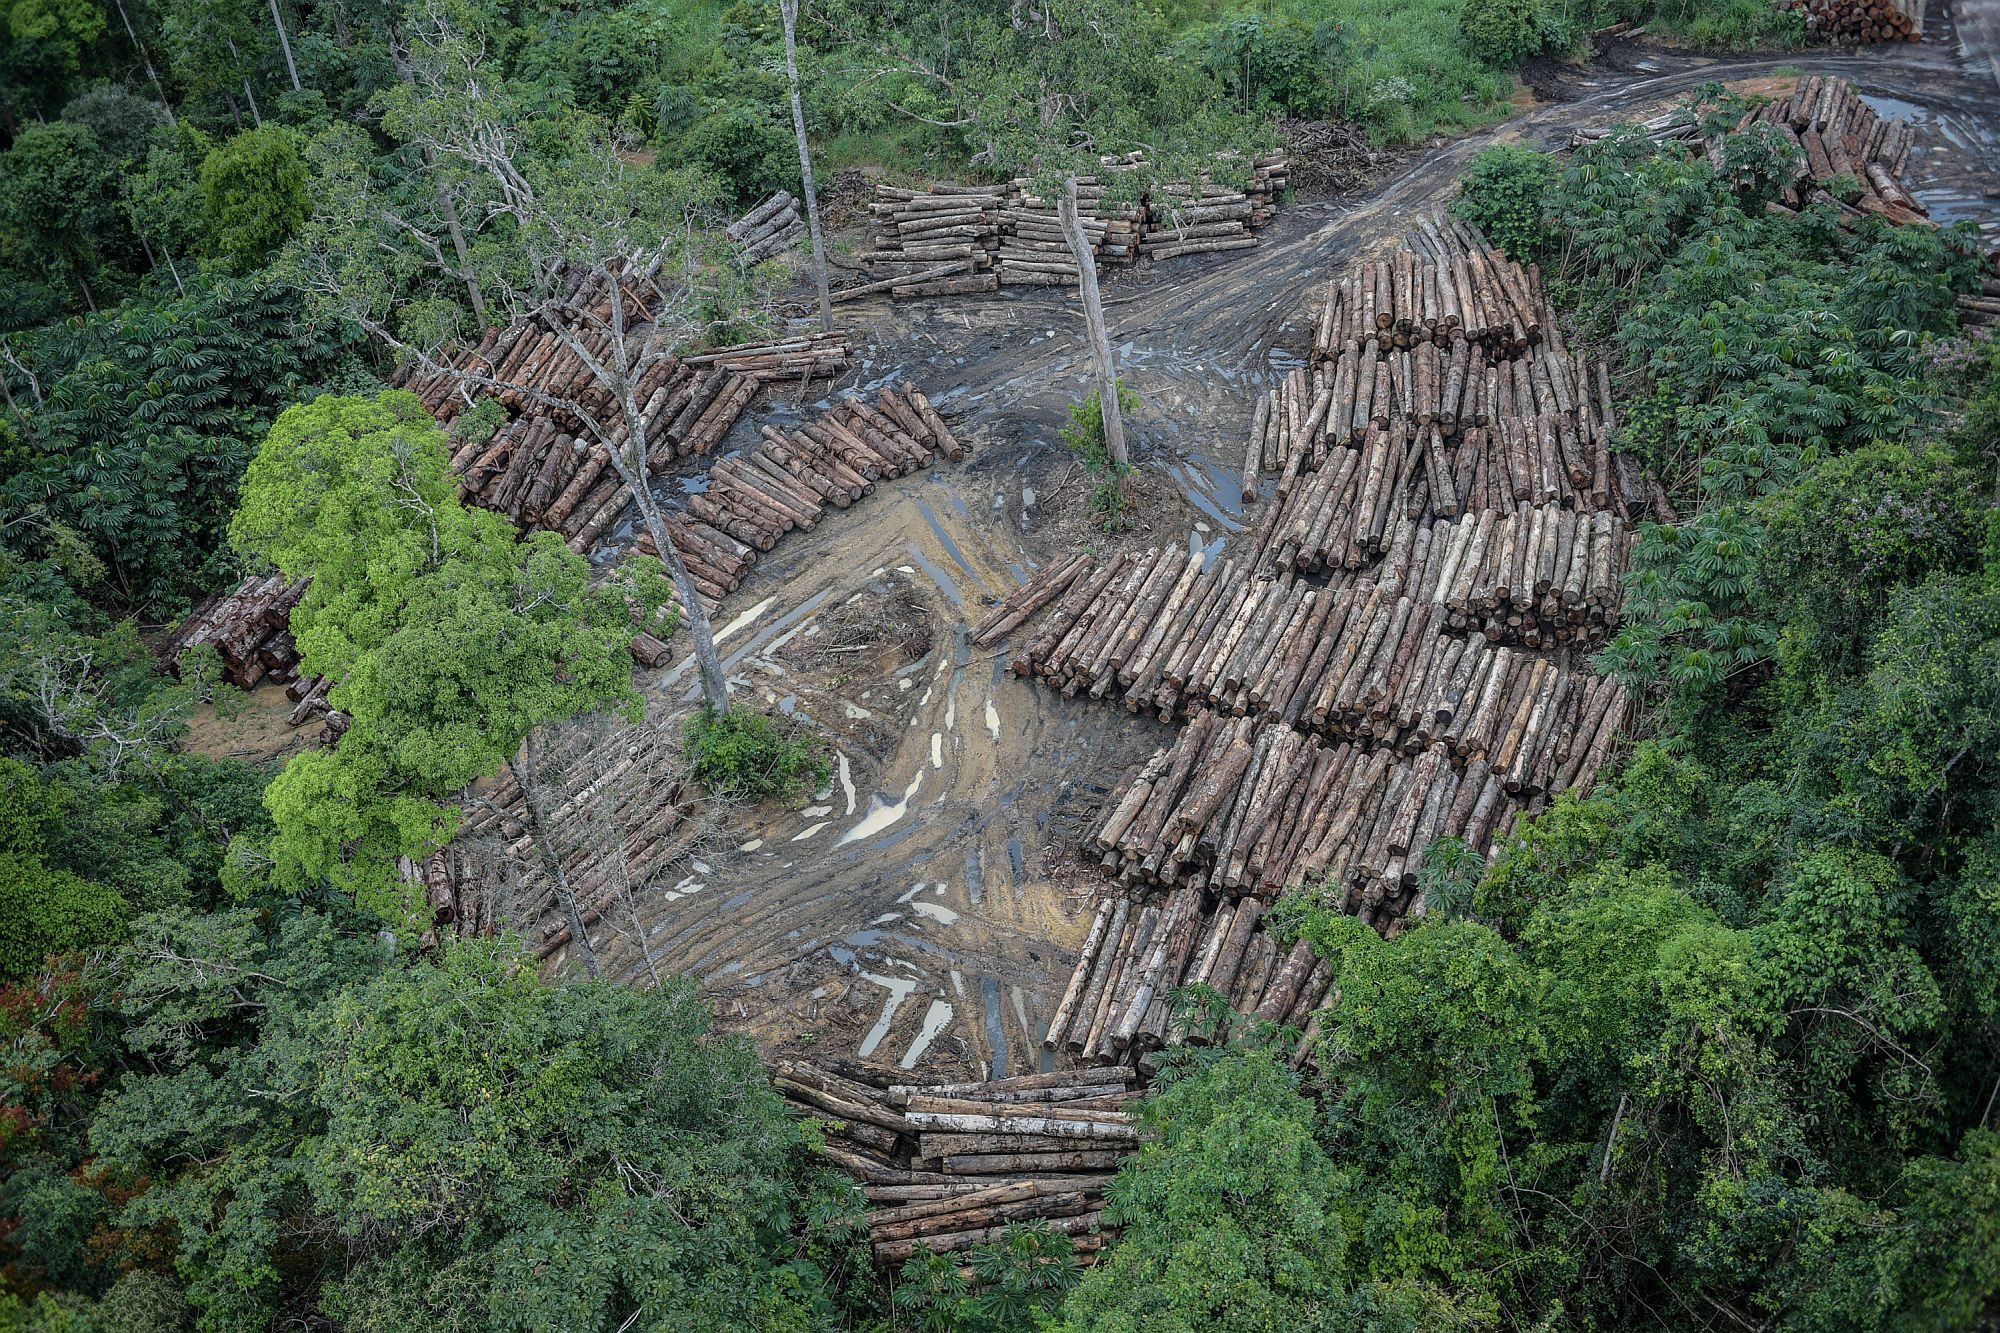 June alone saw the loss of 920 square kilometers of Brazil's Amazon forest